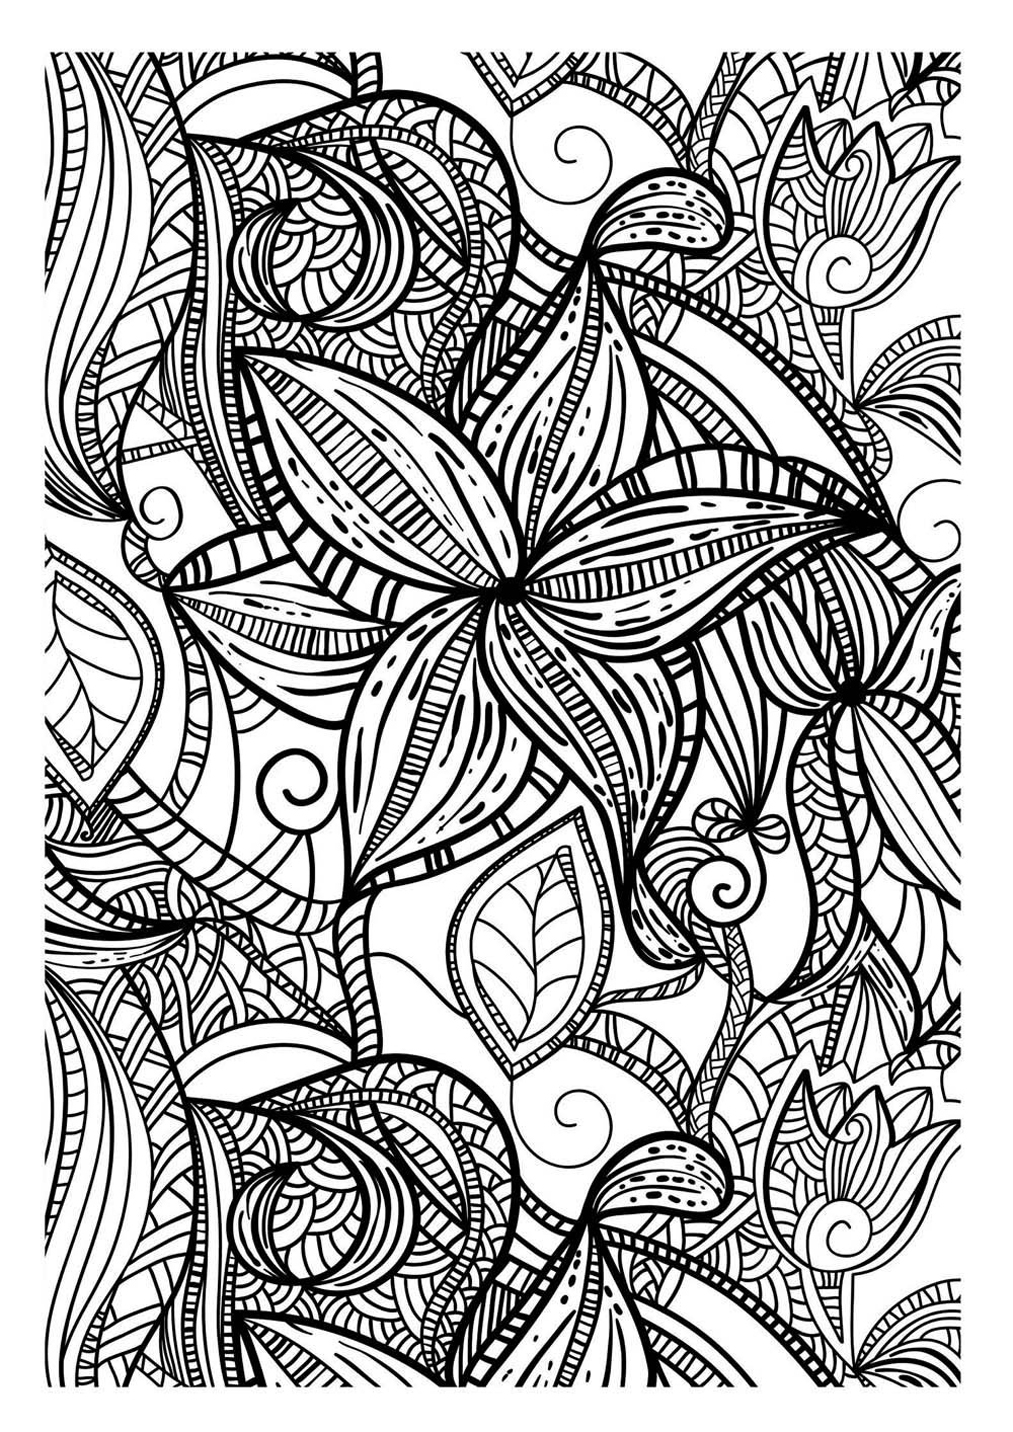 Flowers and leaves with elegant patterns - Flowers Adult Coloring Pages ...